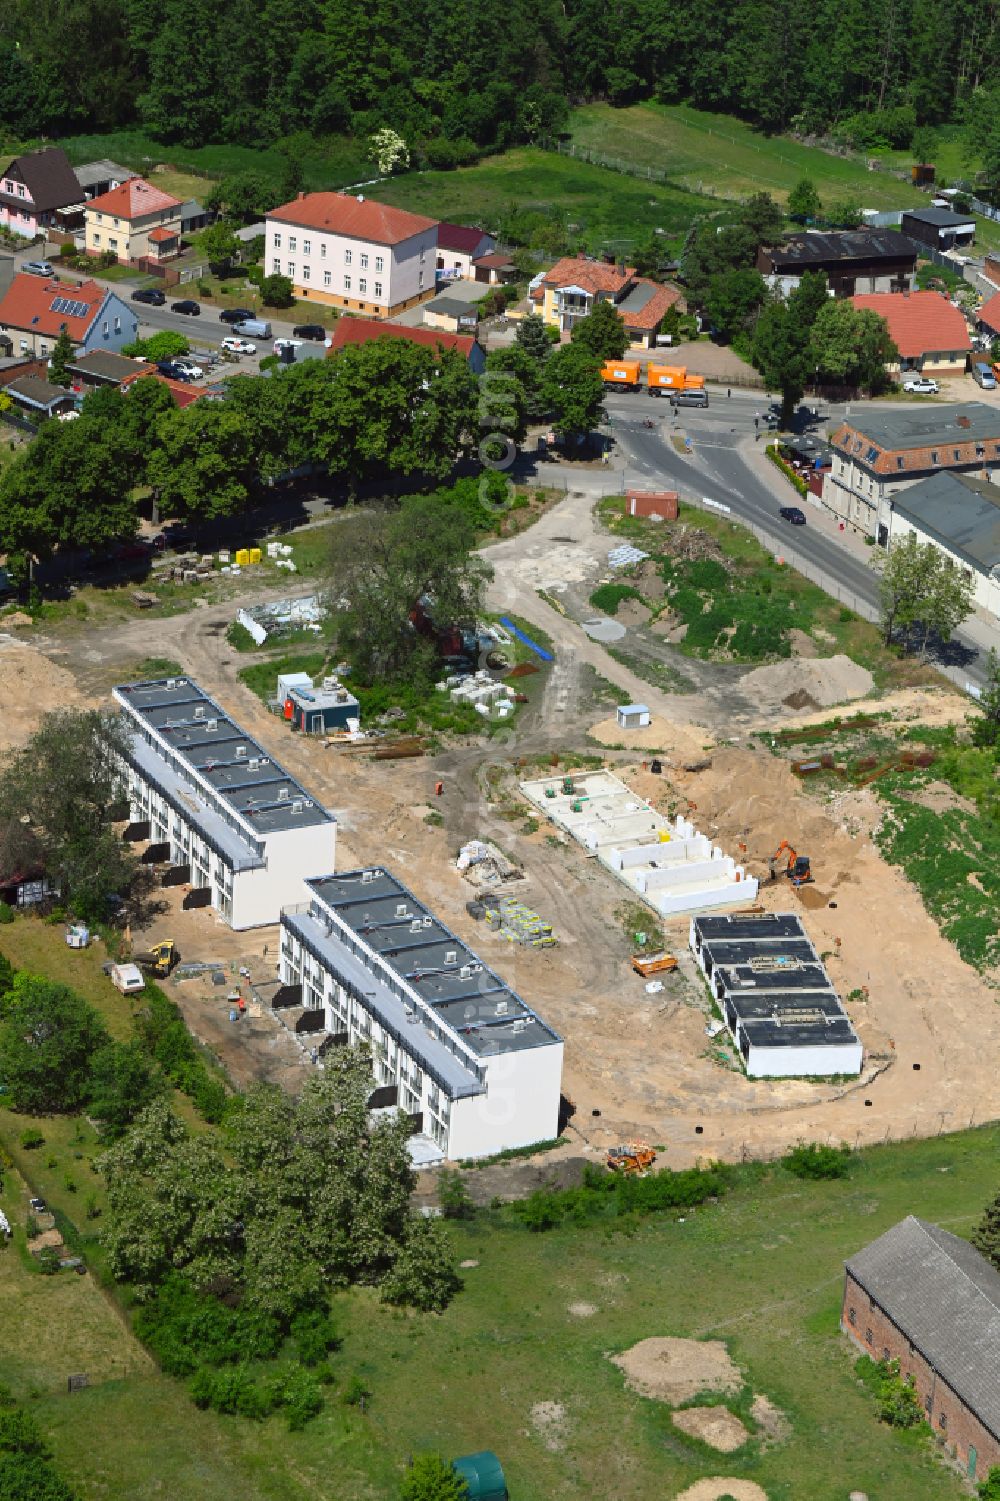 Werneuchen from the bird's eye view: Construction site of a new residential area of the terraced housing estate Landsberger Strasse corner Wegendorfer Strasse in Werneuchen in the state Brandenburg, Germany